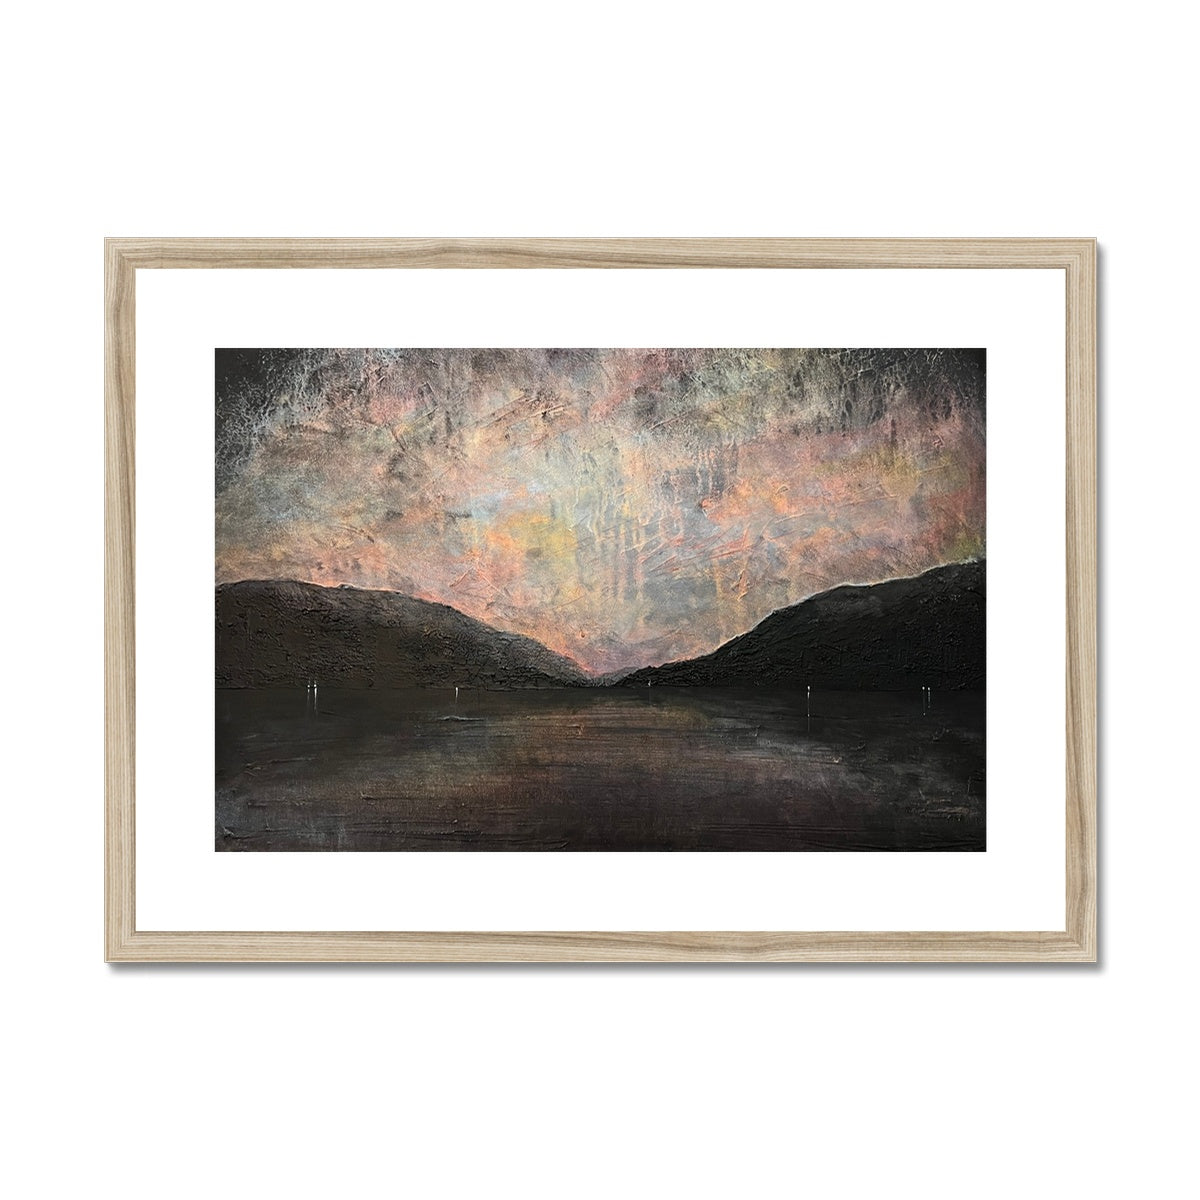 A Brooding Loch Lomond Painting | Framed & Mounted Prints From Scotland-Framed & Mounted Prints-Scottish Lochs & Mountains Art Gallery-A2 Landscape-Natural Frame-Paintings, Prints, Homeware, Art Gifts From Scotland By Scottish Artist Kevin Hunter